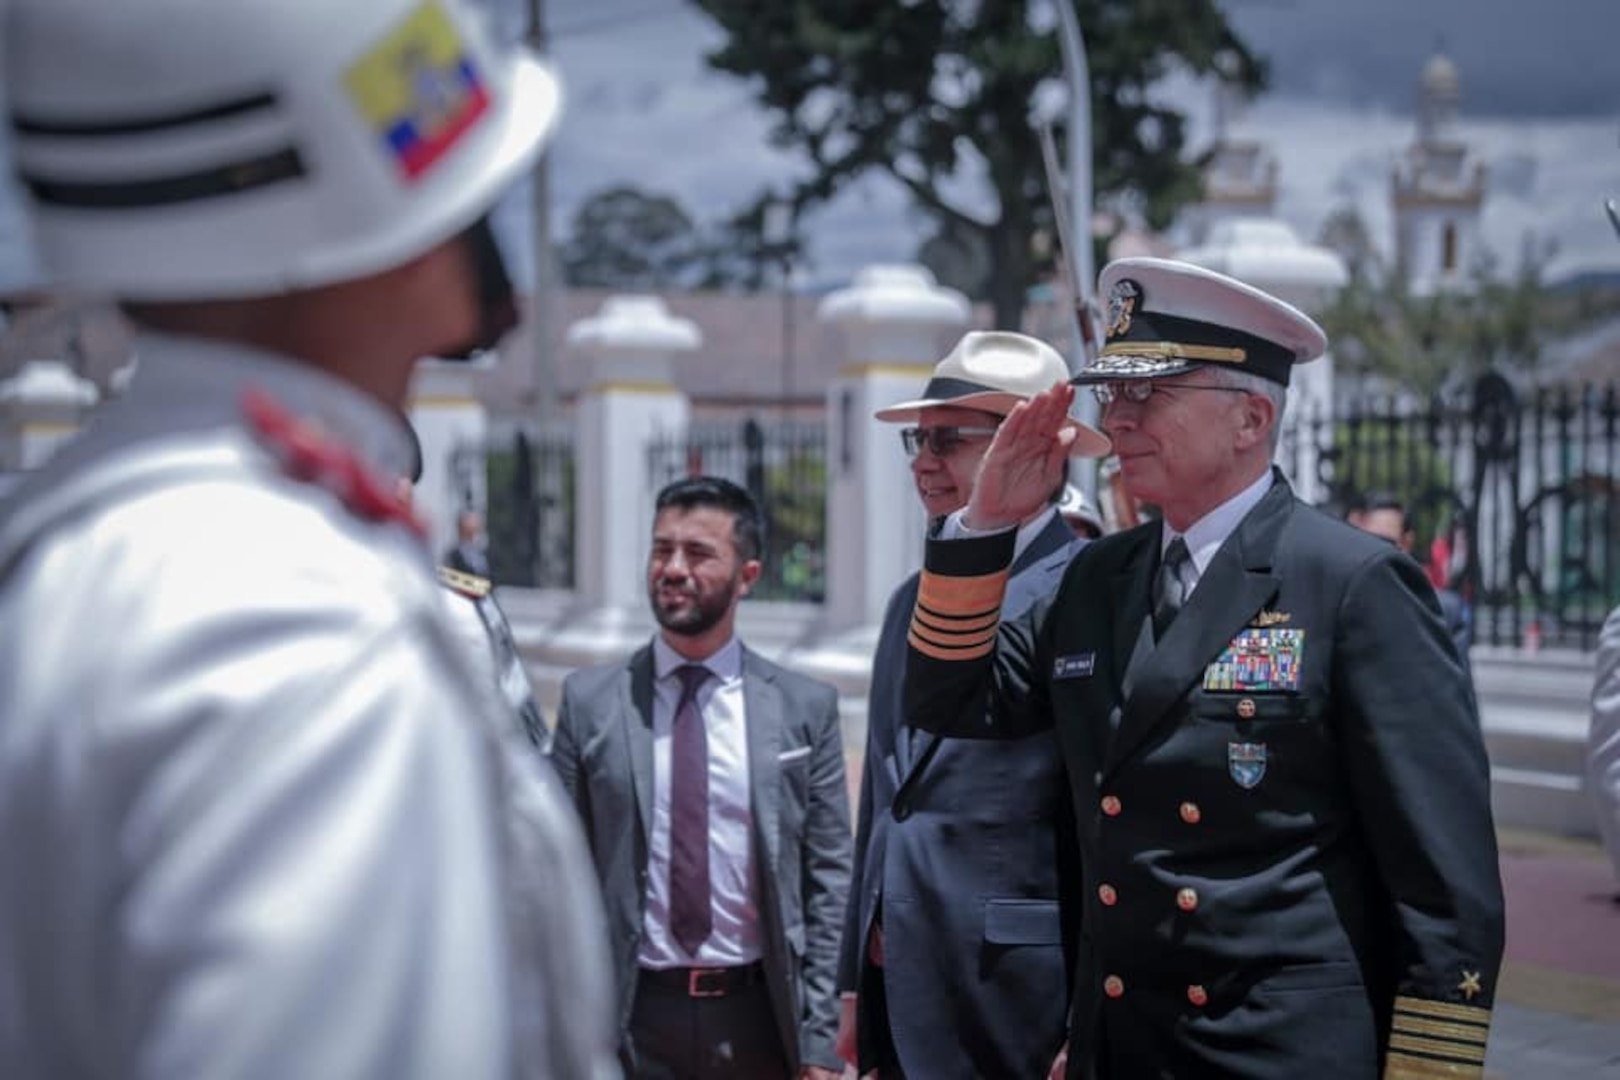 U.S. Navy Adm. Craig Faller, commander of U.S. Southern Command, renders honors upon arrival to meet with Ecuador's Minister of Defence, General Oswaldo Jarrín.